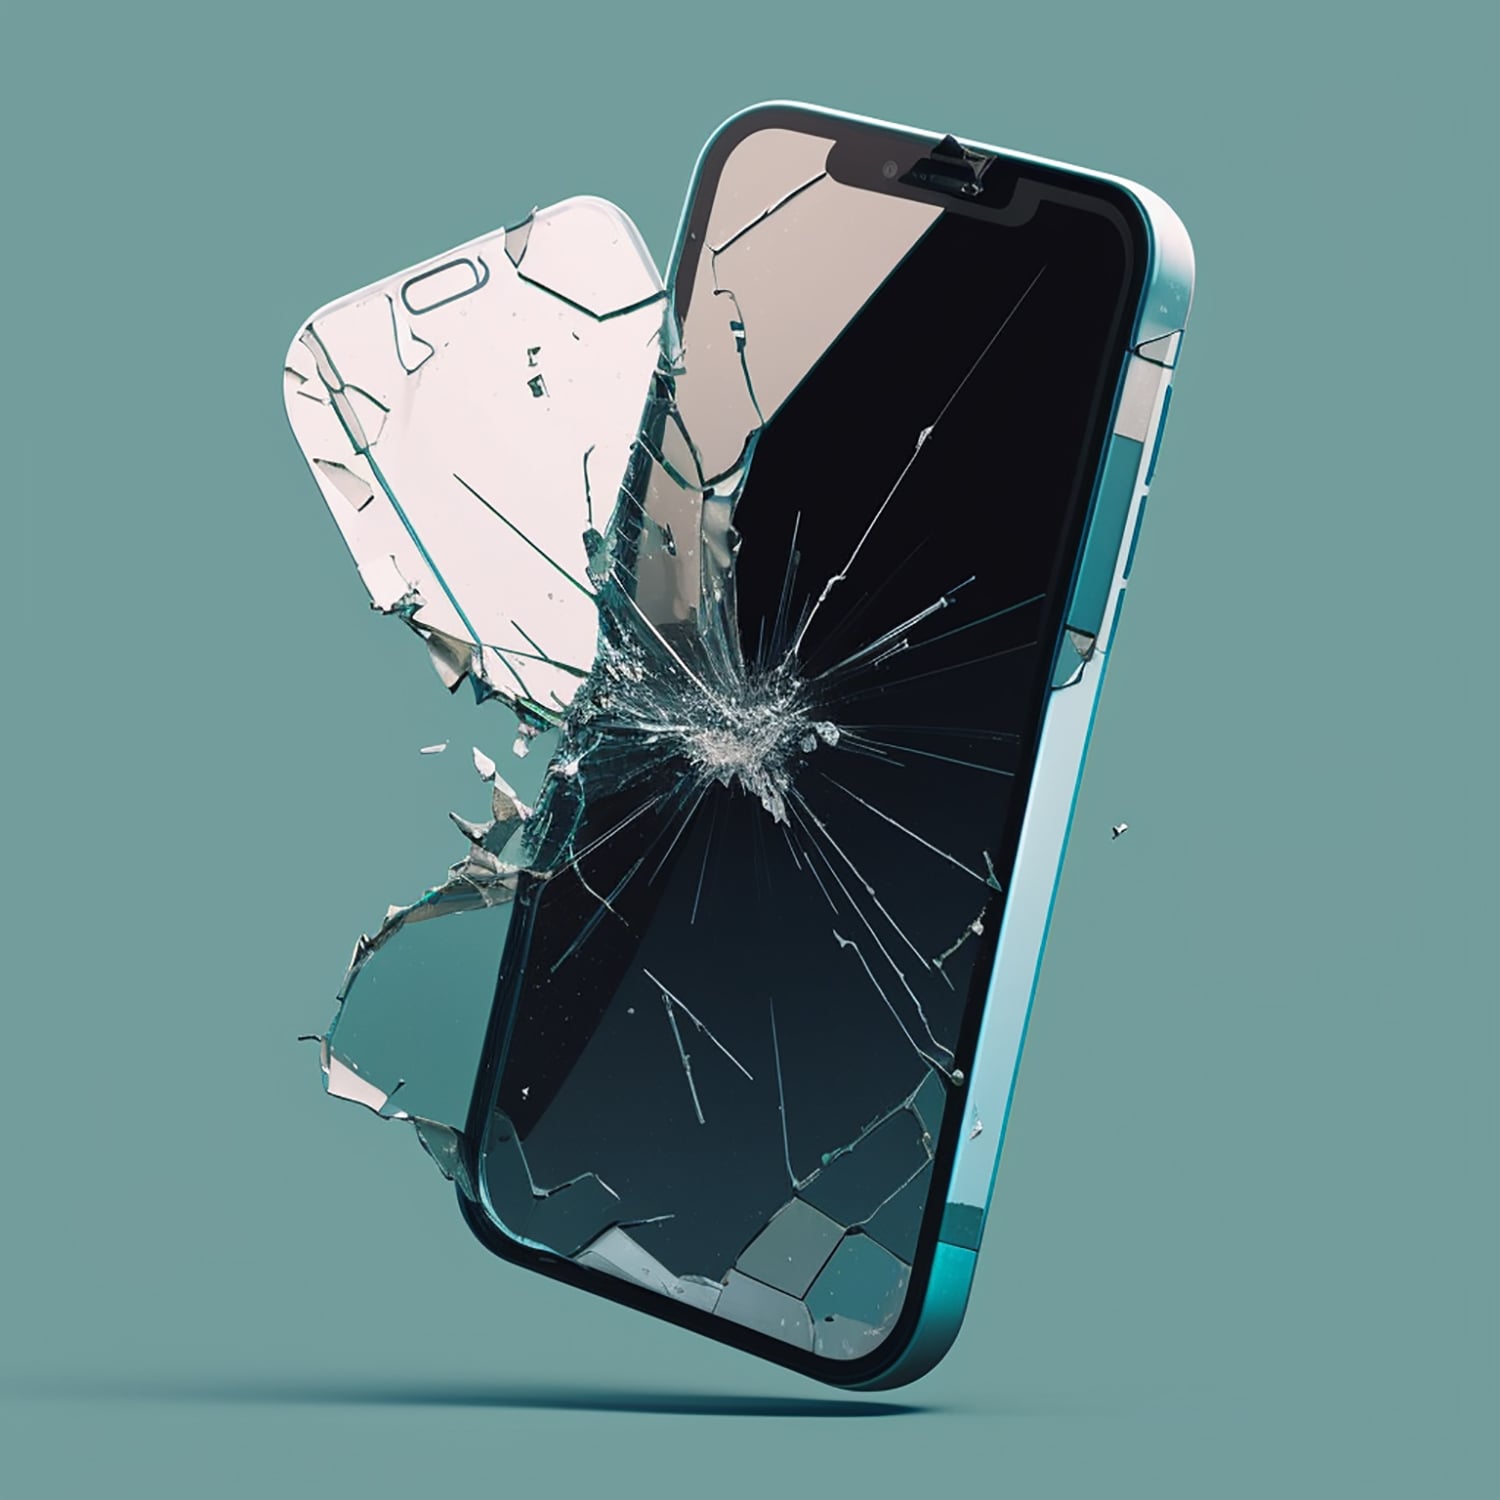 You are currently viewing 10 ways to protect your device from breaking